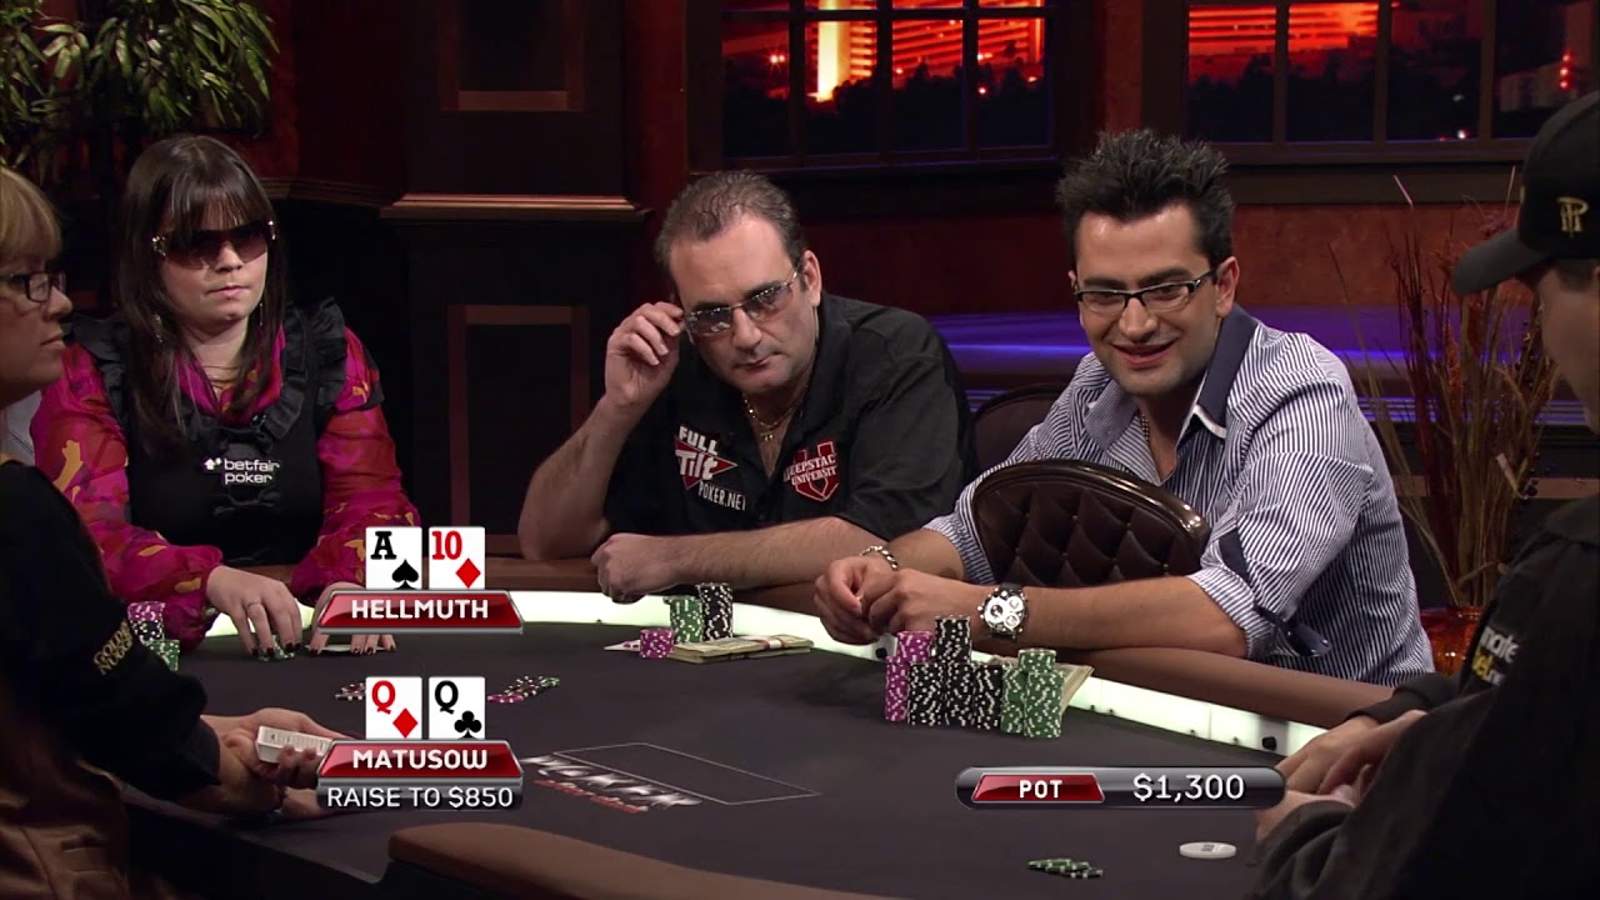 Phil Hellmuth, What Are You Doing?